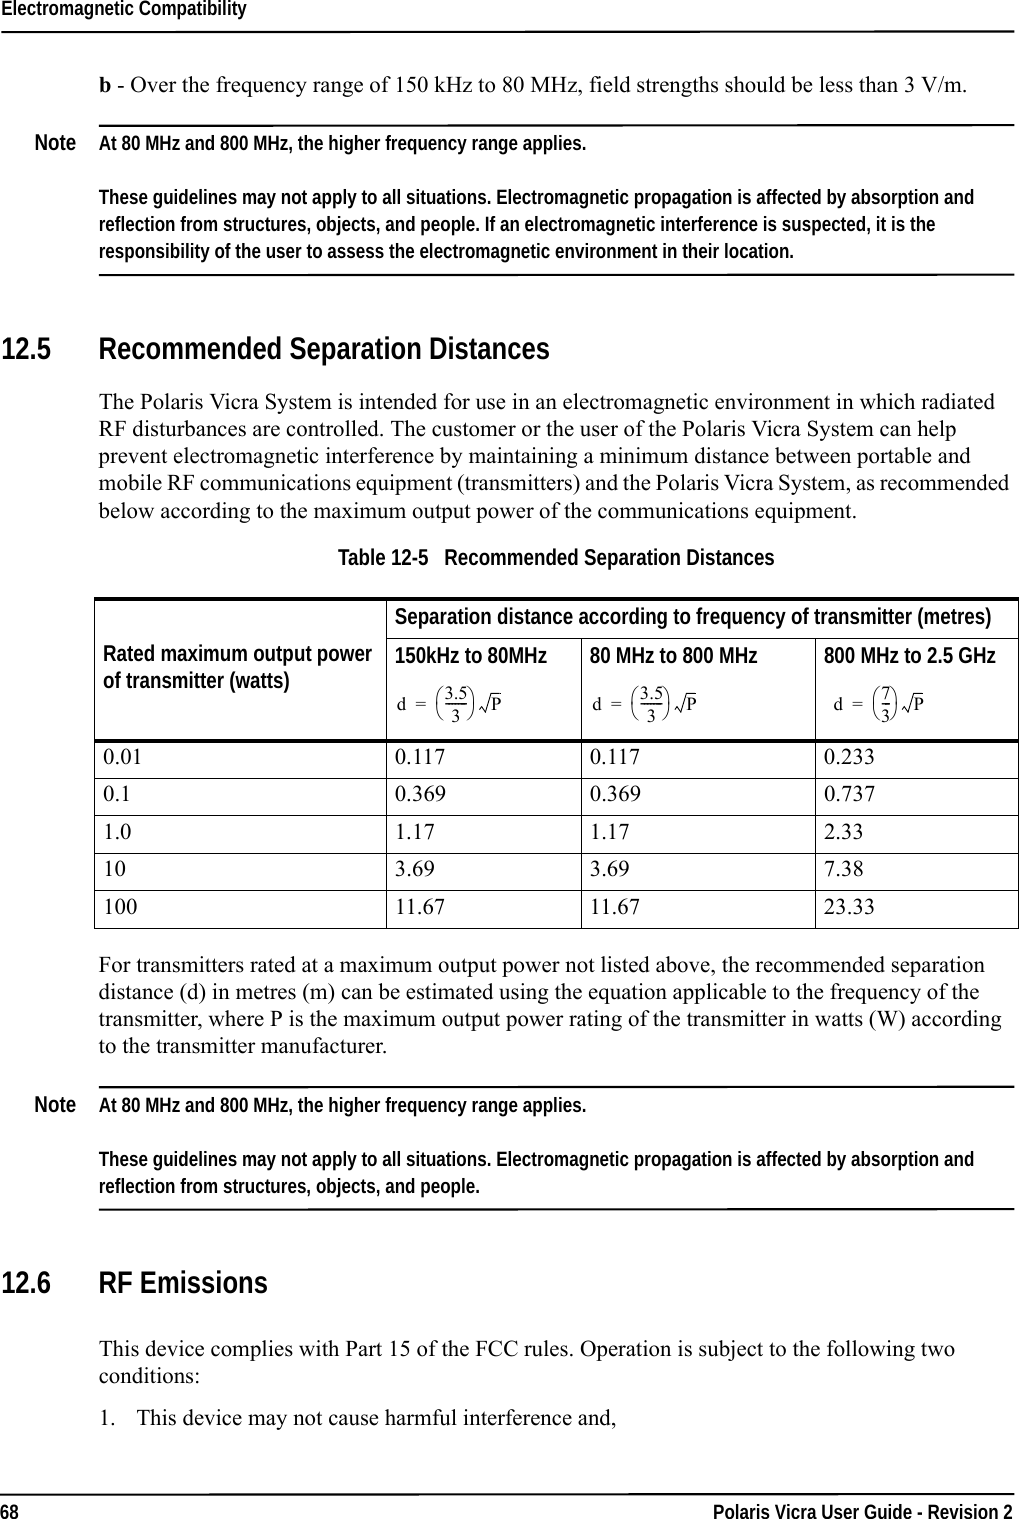 Electromagnetic Compatibility68 Polaris Vicra User Guide - Revision 2b - Over the frequency range of 150 kHz to 80 MHz, field strengths should be less than 3 V/m.Note At 80 MHz and 800 MHz, the higher frequency range applies. These guidelines may not apply to all situations. Electromagnetic propagation is affected by absorption and reflection from structures, objects, and people. If an electromagnetic interference is suspected, it is the responsibility of the user to assess the electromagnetic environment in their location.12.5 Recommended Separation Distances The Polaris Vicra System is intended for use in an electromagnetic environment in which radiated RF disturbances are controlled. The customer or the user of the Polaris Vicra System can help prevent electromagnetic interference by maintaining a minimum distance between portable and mobile RF communications equipment (transmitters) and the Polaris Vicra System, as recommended below according to the maximum output power of the communications equipment.For transmitters rated at a maximum output power not listed above, the recommended separation distance (d) in metres (m) can be estimated using the equation applicable to the frequency of the transmitter, where P is the maximum output power rating of the transmitter in watts (W) according to the transmitter manufacturer.Note At 80 MHz and 800 MHz, the higher frequency range applies. These guidelines may not apply to all situations. Electromagnetic propagation is affected by absorption and reflection from structures, objects, and people.12.6 RF EmissionsThis device complies with Part 15 of the FCC rules. Operation is subject to the following two conditions:1. This device may not cause harmful interference and,Table 12-5   Recommended Separation DistancesRated maximum output power of transmitter (watts)Separation distance according to frequency of transmitter (metres)150kHz to 80MHz 80 MHz to 800 MHz 800 MHz to 2.5 GHz0.01 0.117 0.117  0.233 0.1 0.369 0.369  0.737 1.0 1.17 1.17  2.33 10 3.69 3.69  7.38 100 11.67 11.67  23.33 d3.53-------P= d 3.53-------P= d 73--- P=